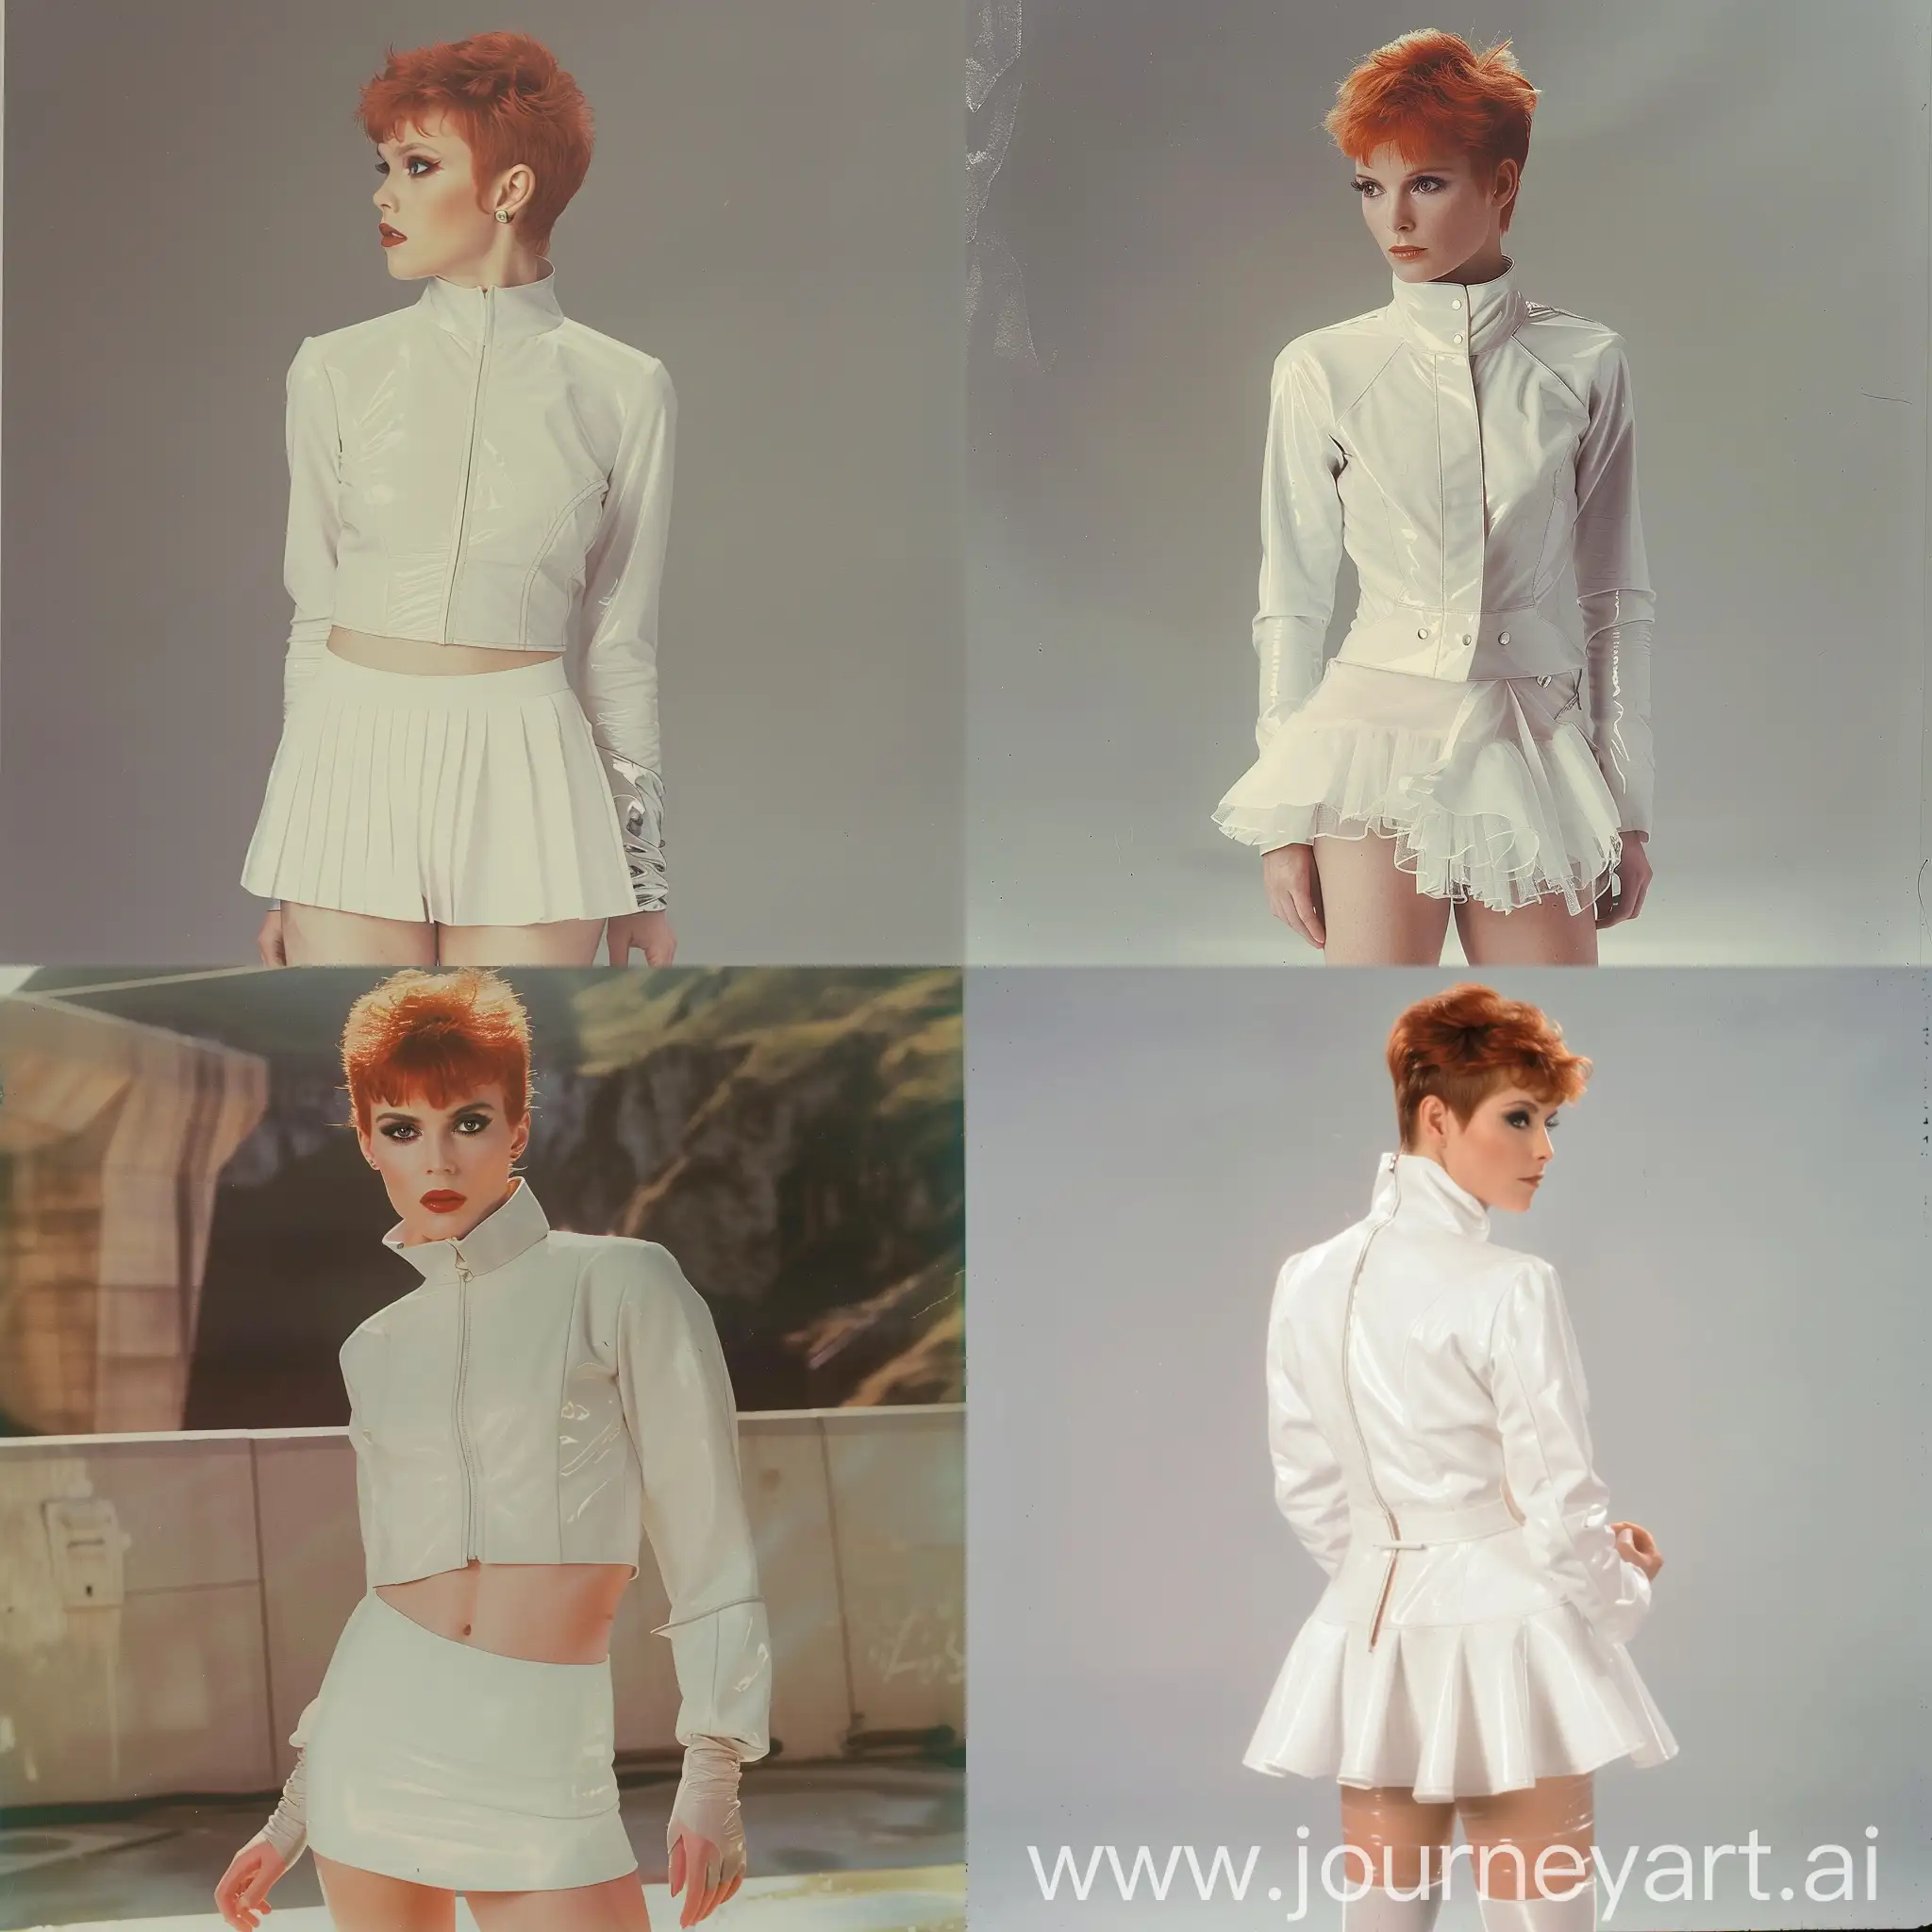 1980s Wynona Ryder short red hair, wear a high collared latex white jacket, with a white skirt